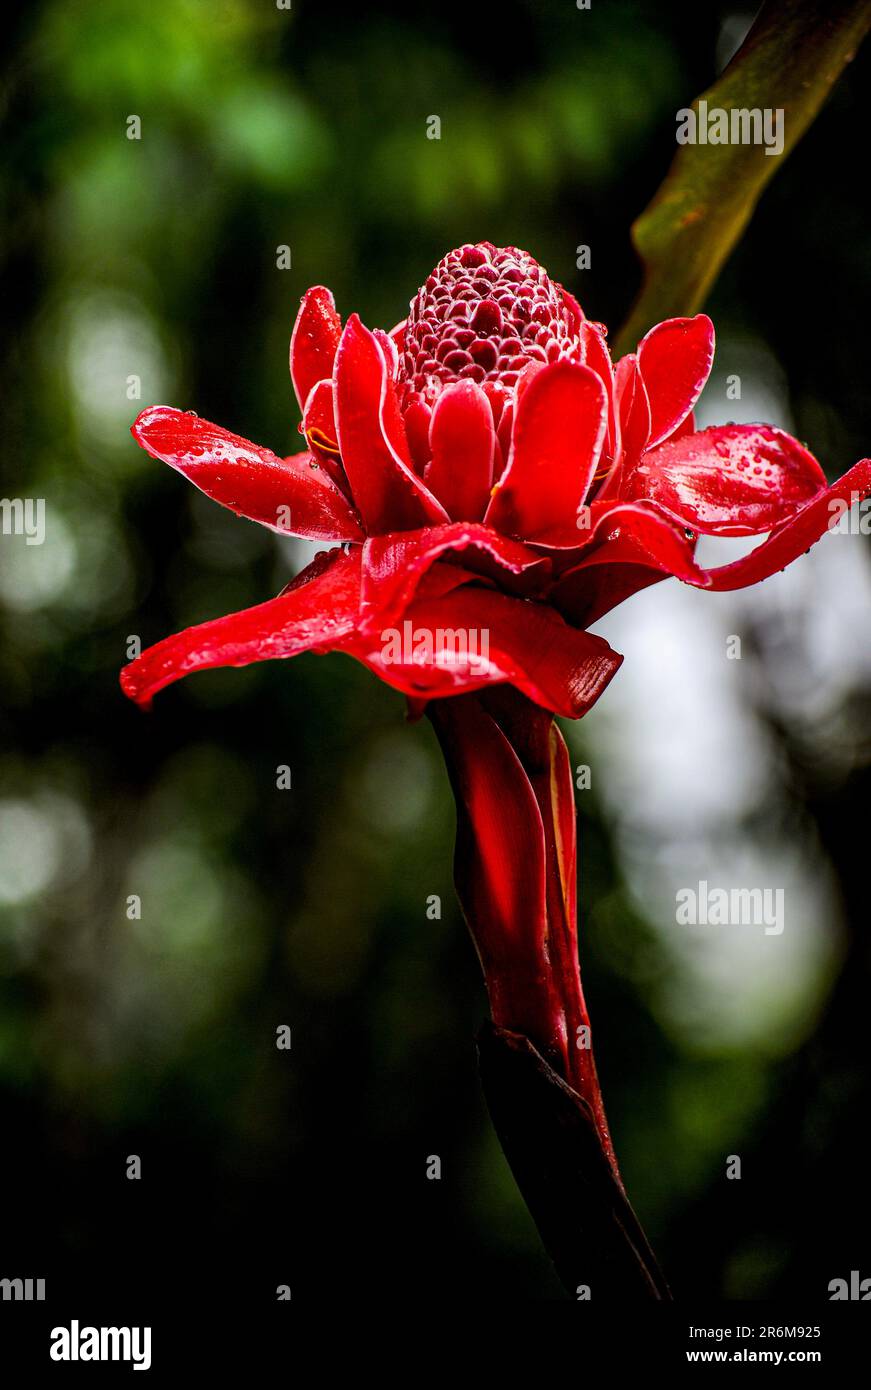 The stunning red and green colors of the Costa Rican jungle's Red Torch Ginger bloom. Stock Photo